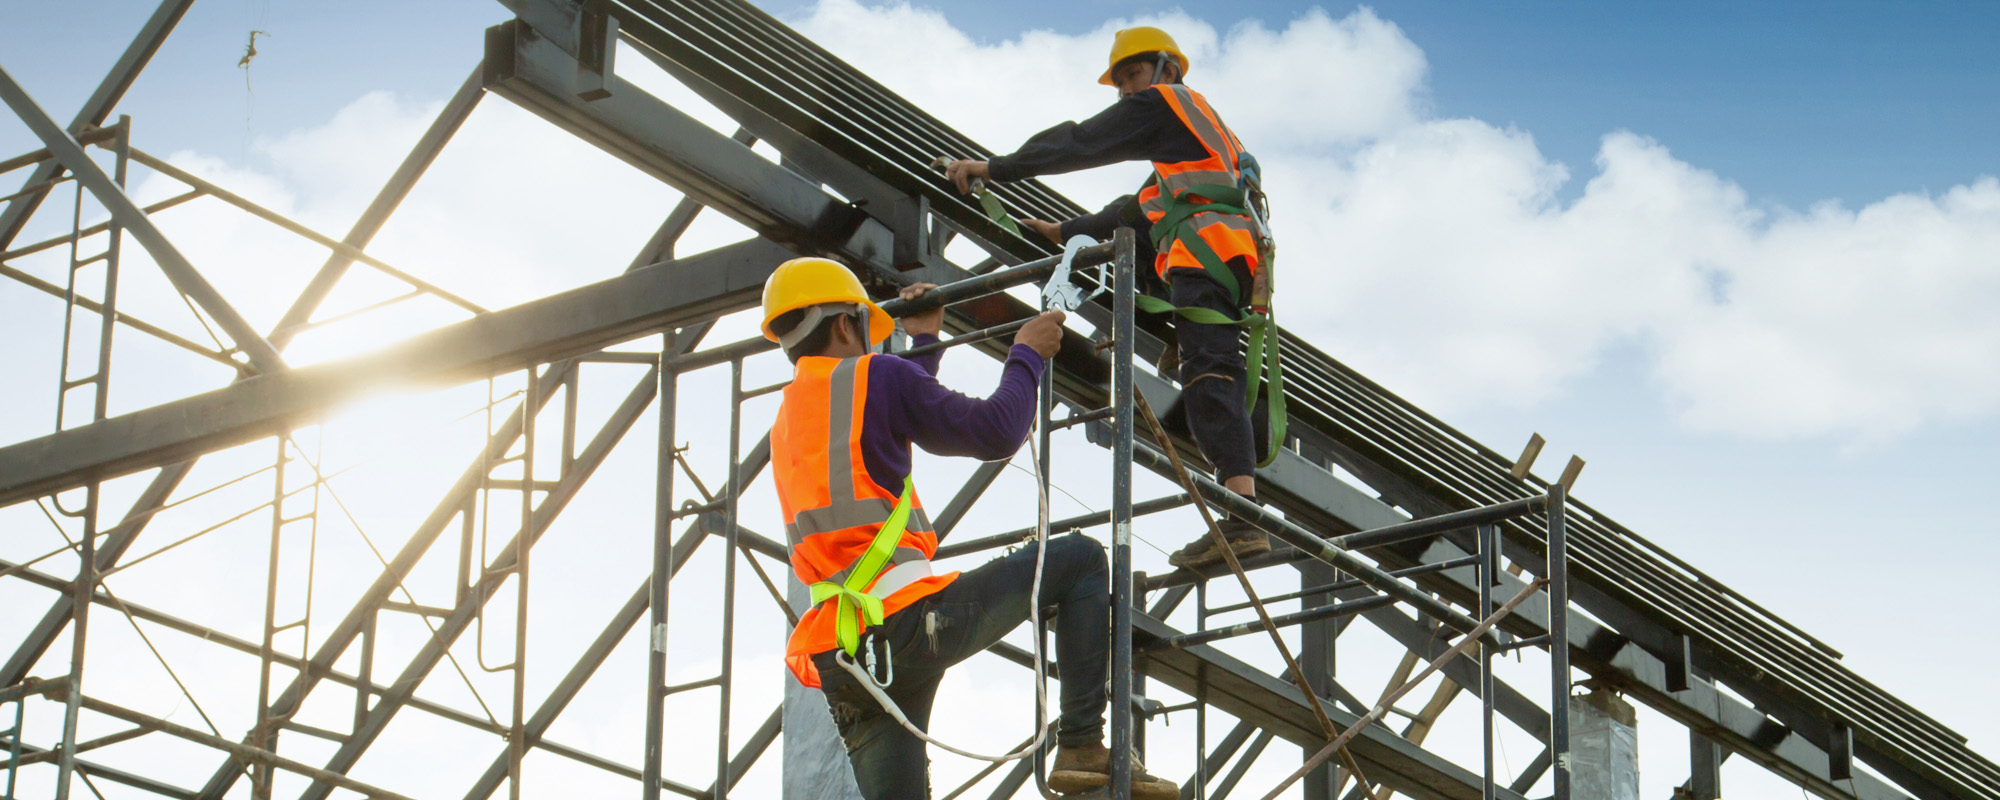 construction worker control in the construction of roof structures